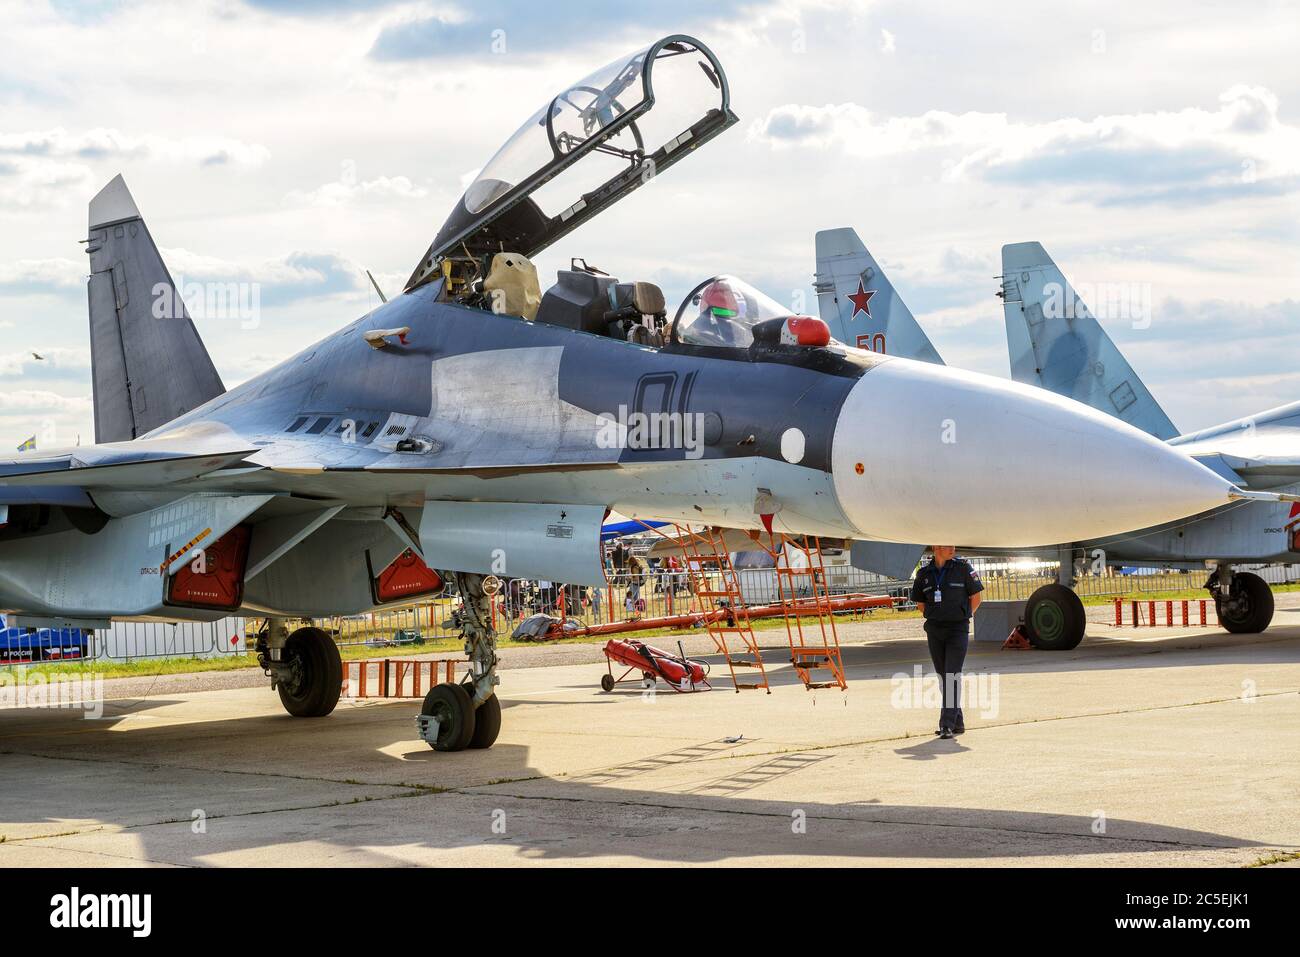 MOSCOW REGION - AUGUST 28, 2015: Russian multirole fighter Sukhoi Su-30 'Flanker-C' at the International Aviation and Space Salon (MAKS) in Zhukovsky. Stock Photo